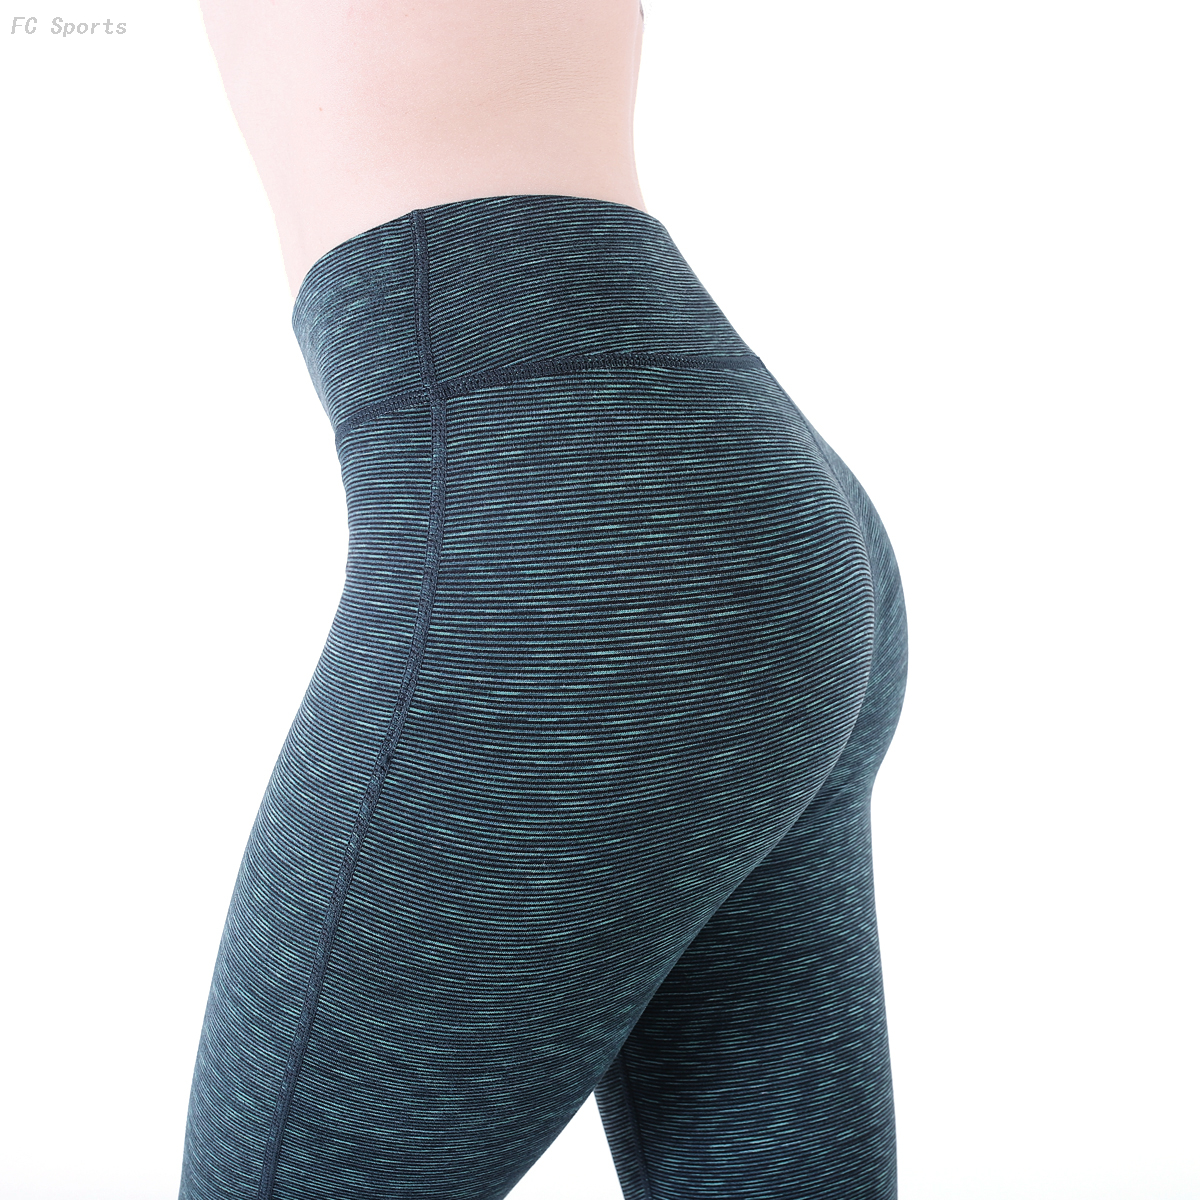 Legging Yoga Pants Stretch Breathable Fitness Dry Fit Clothes Active Gym Wear for Women